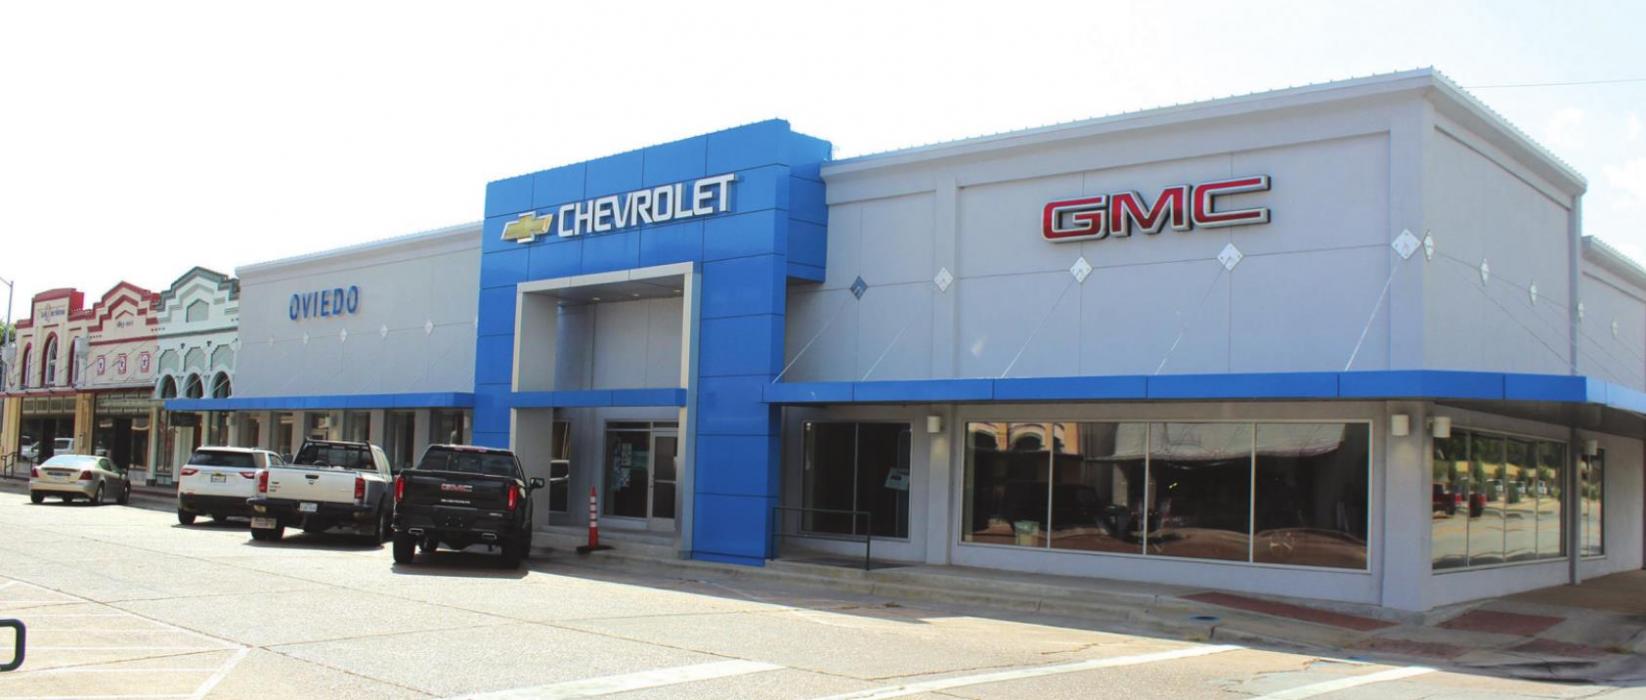 LG Chevrolet Dealership Moving Out of Downtown and to the Bypass